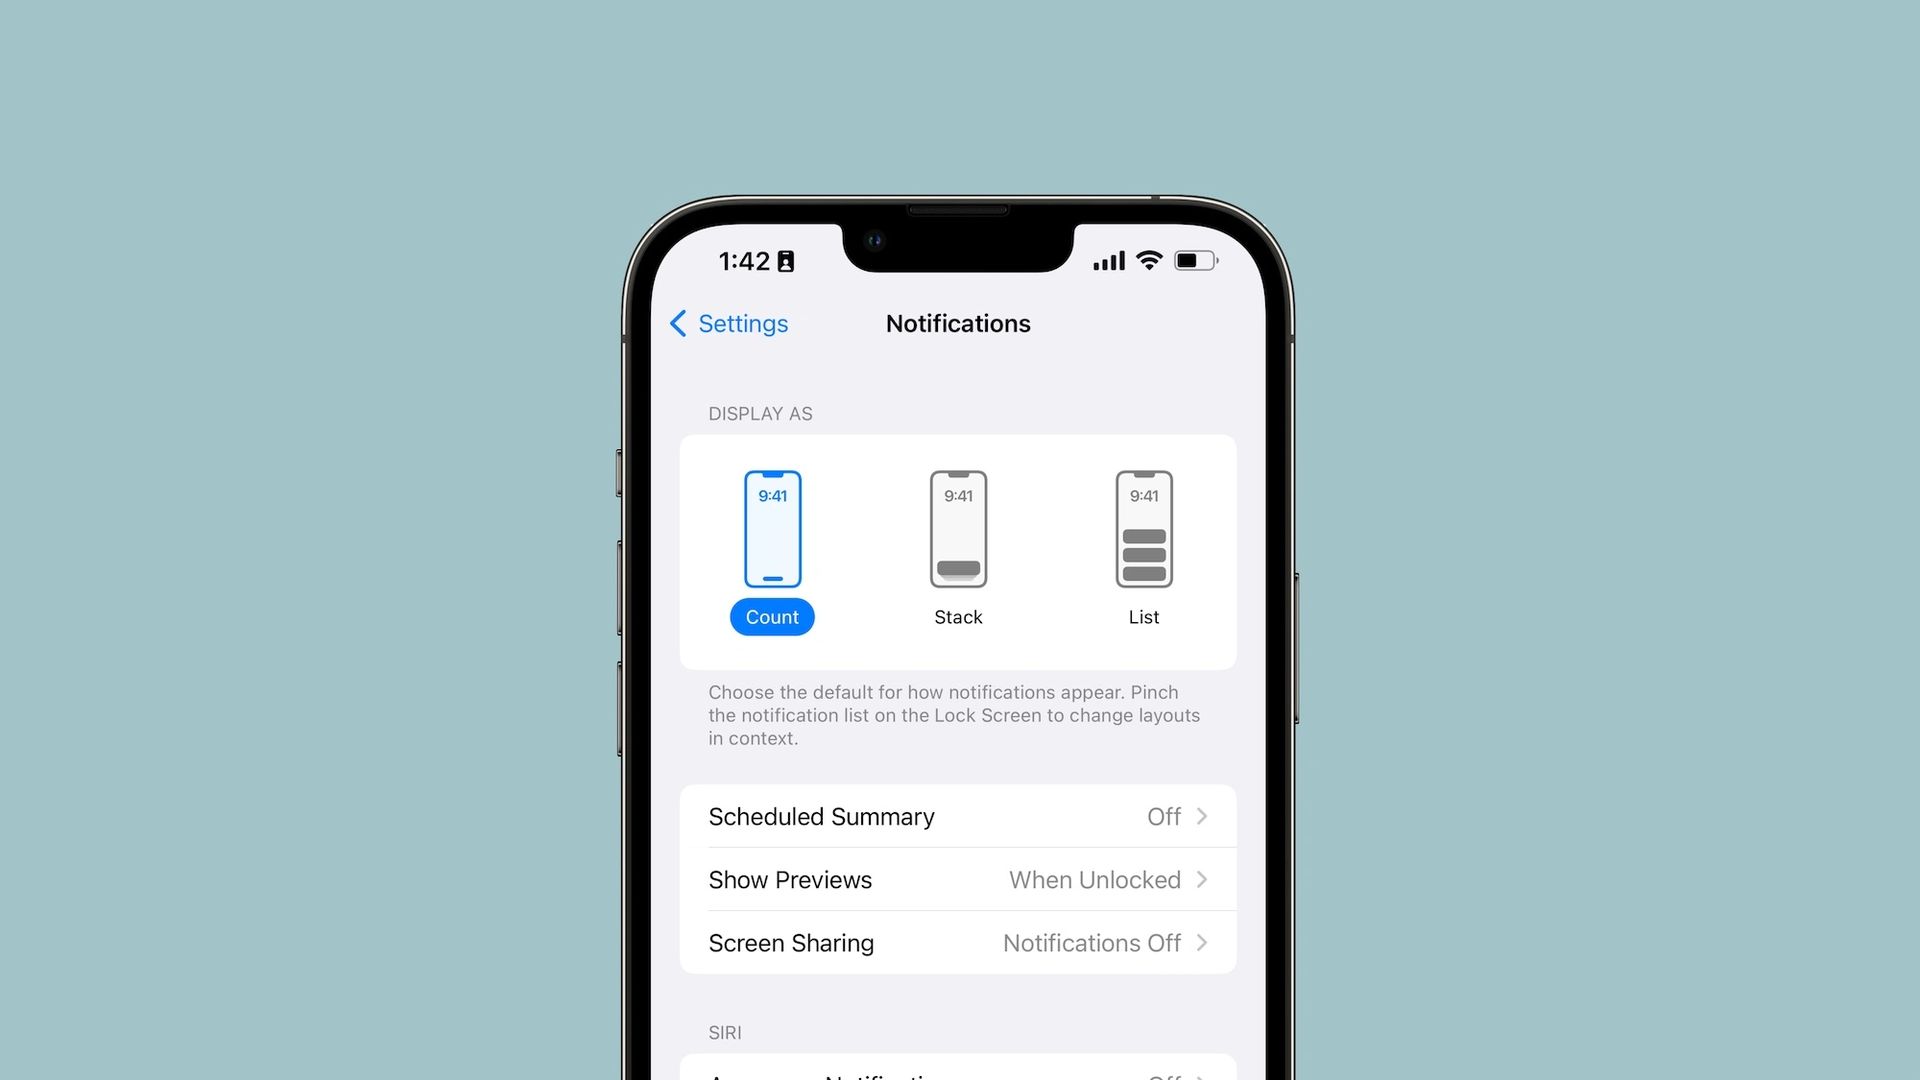 The whole world can now download and make use of the new iOS 16 features. Apple has issued its latest significant upgrade for iPhone owners worldwide after...